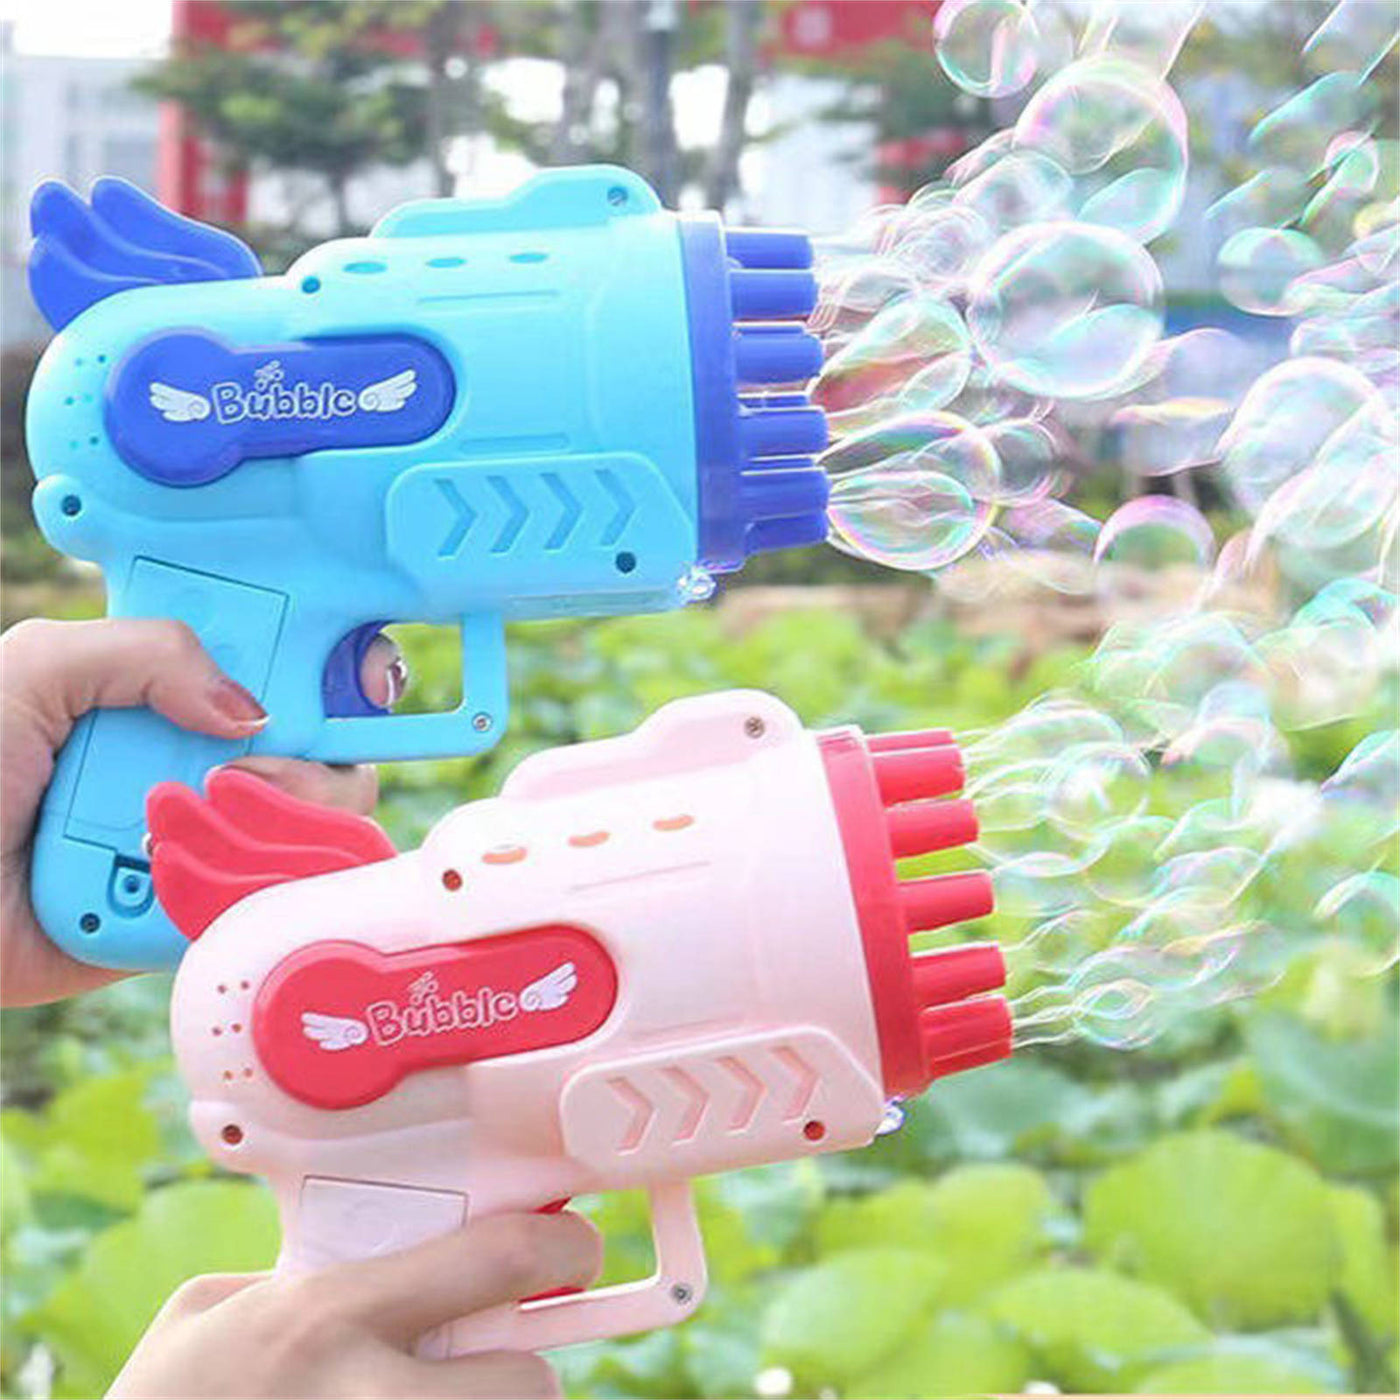 Angel 12-Hole Bubble Gun a Dual-Purpose Bubble Fan for Children to Play Pink